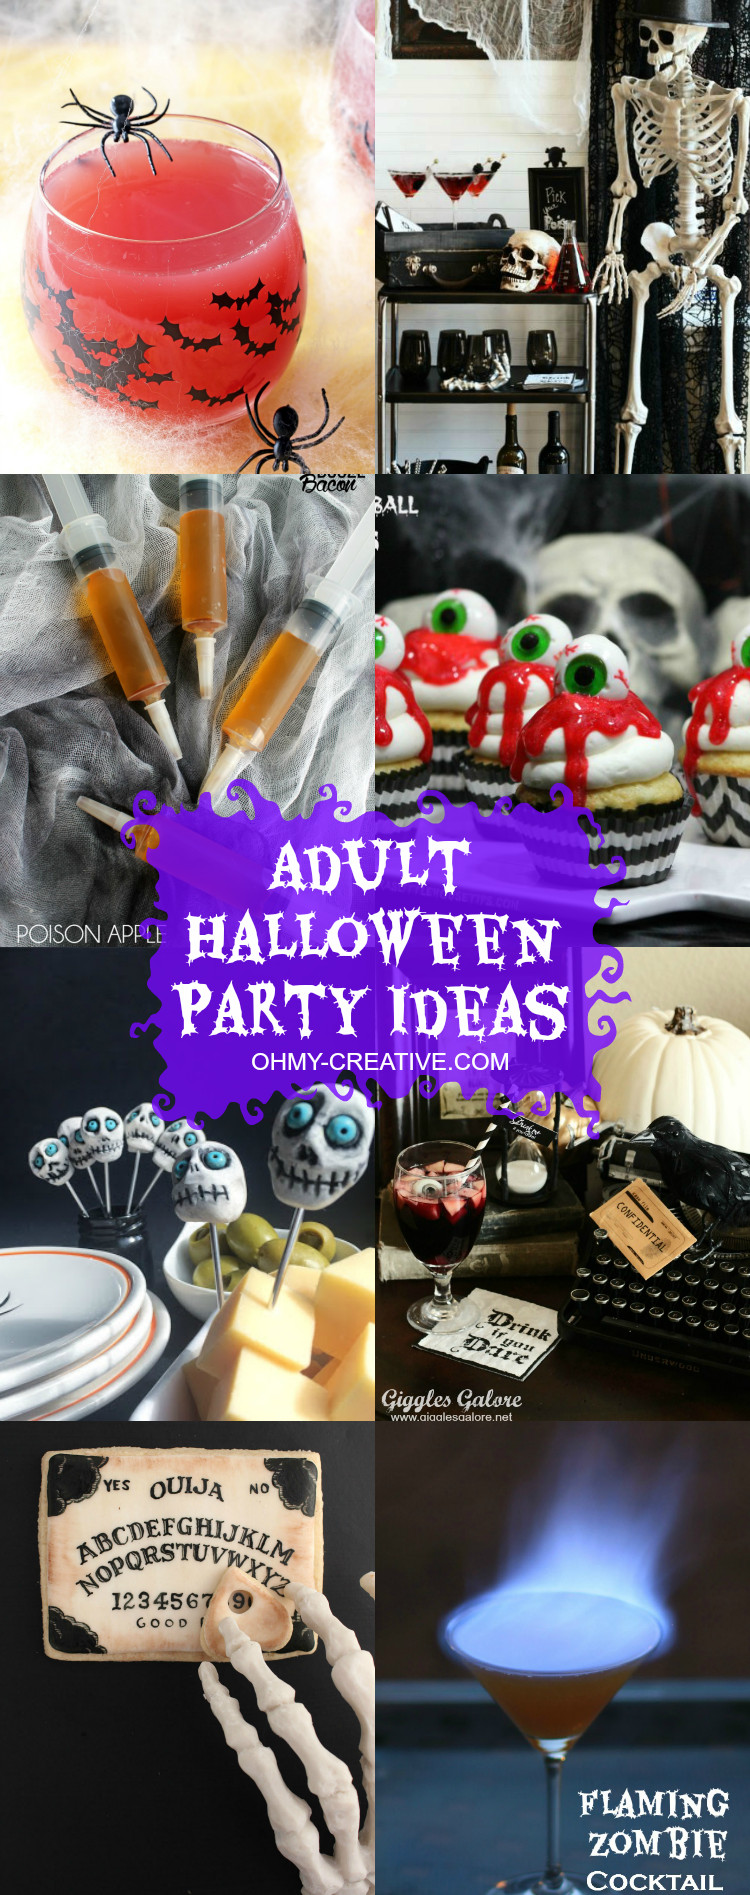 Halloween Adults Party Ideas
 Adult Halloween Party Ideas Oh My Creative